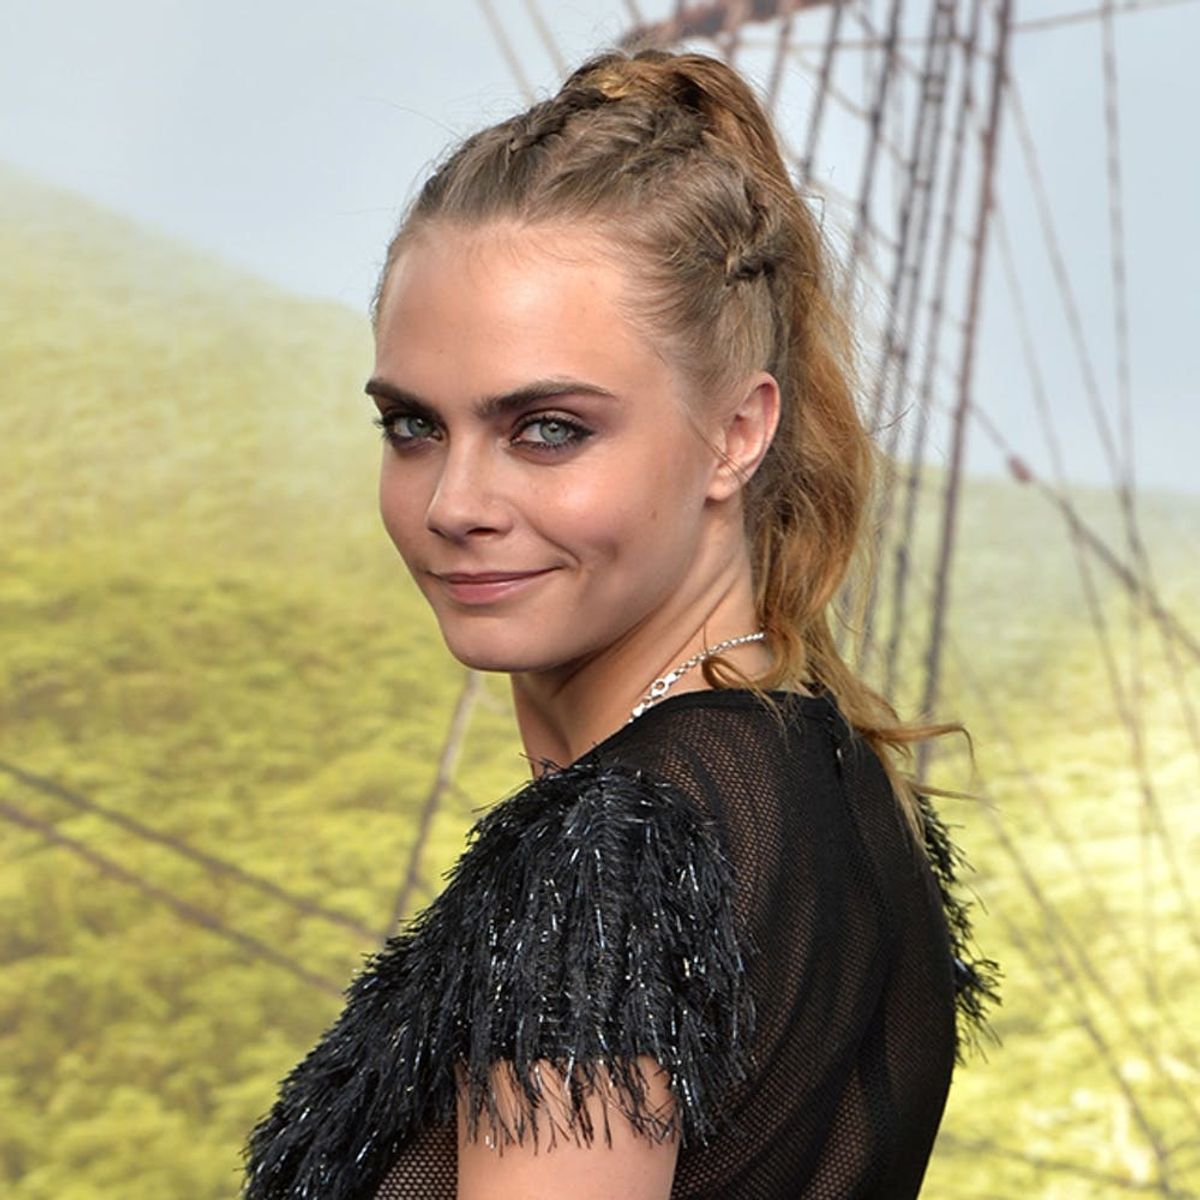 Celebrity Trainers Share How to Hack Cara Delevingne’s Action Movie Star Fitness Routine